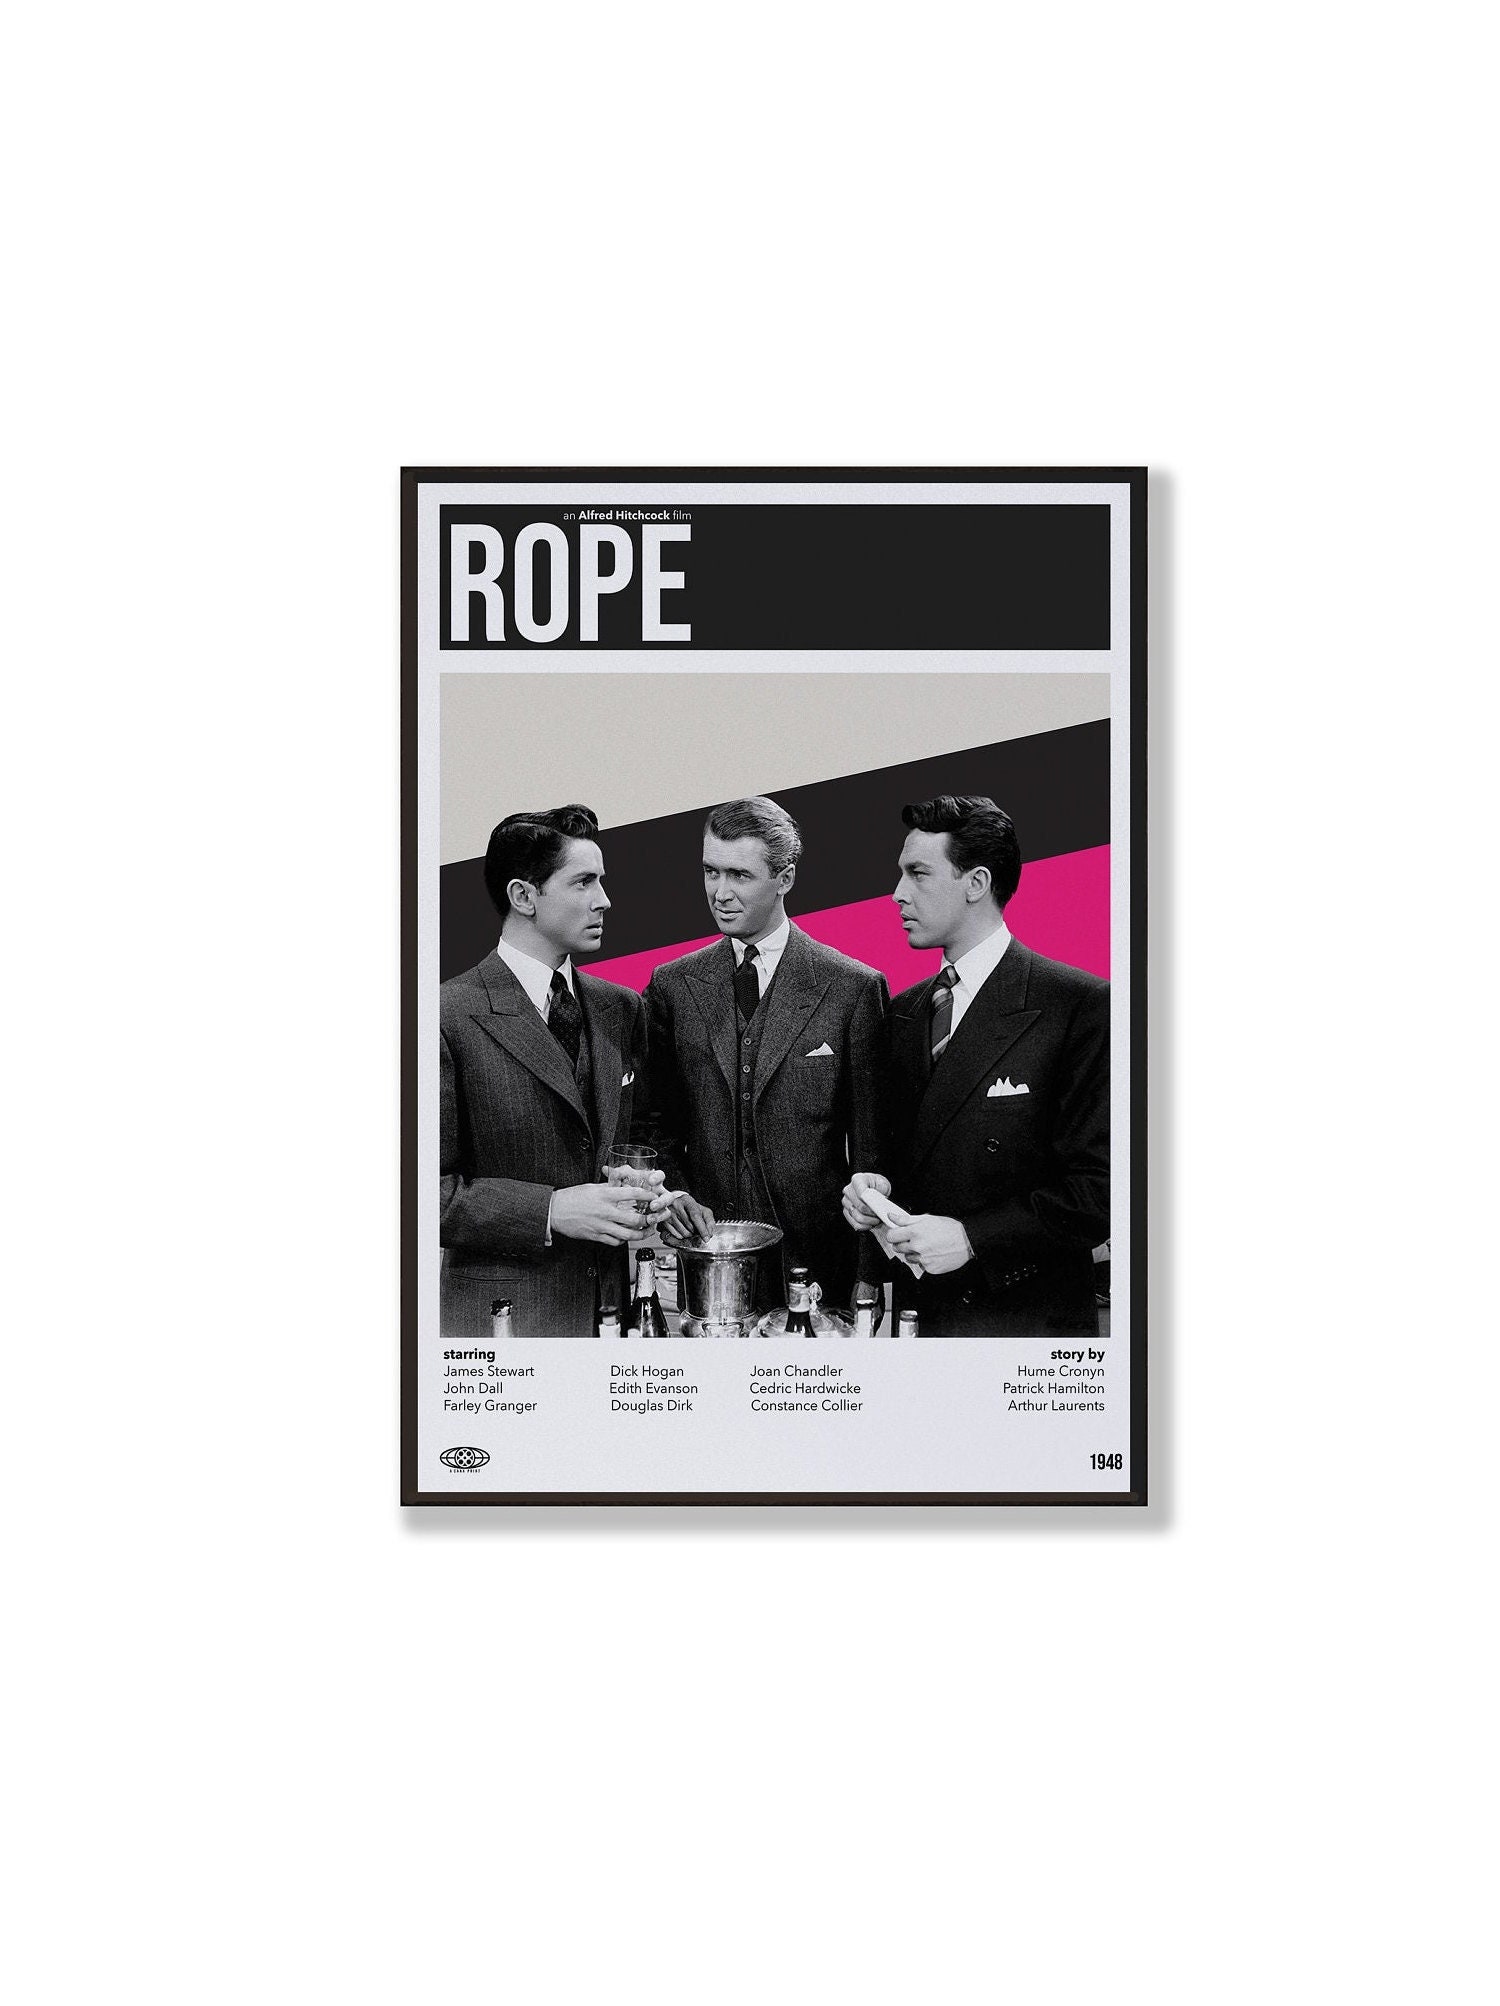 Rope-an Original Vintage Movie Poster for Alfred Hitchcock's Thriller and  the Perfect Crime With James Stewart, John Dall and Farley Granger 